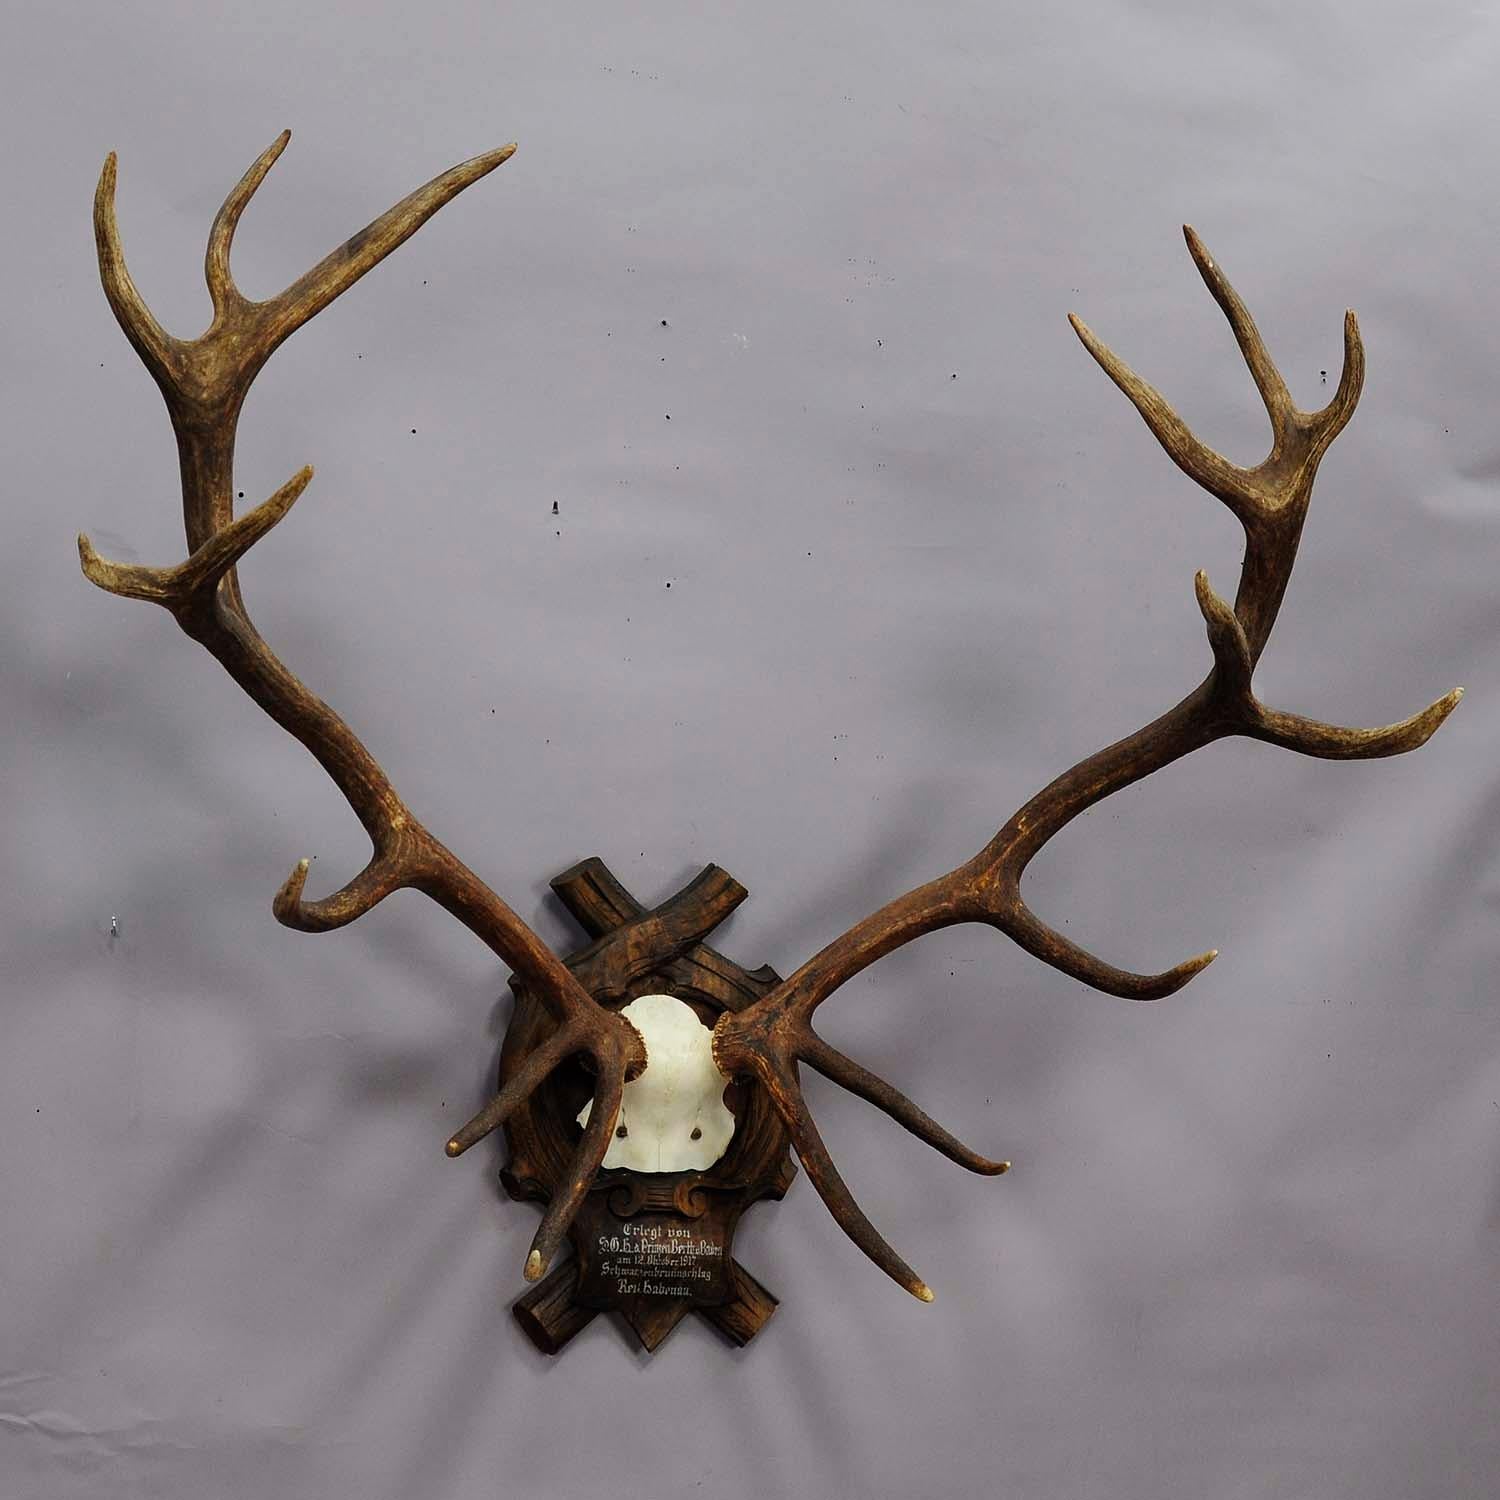 A marvelous 16 pointer Black Forest deer trophy from the palace of Salem in south Germany. Shot by a member of the lordly family of Baden. Mounted on wooden plaque. Handwritten inscription from shooter Prince Berth from Baden 1917.

Dimensions: